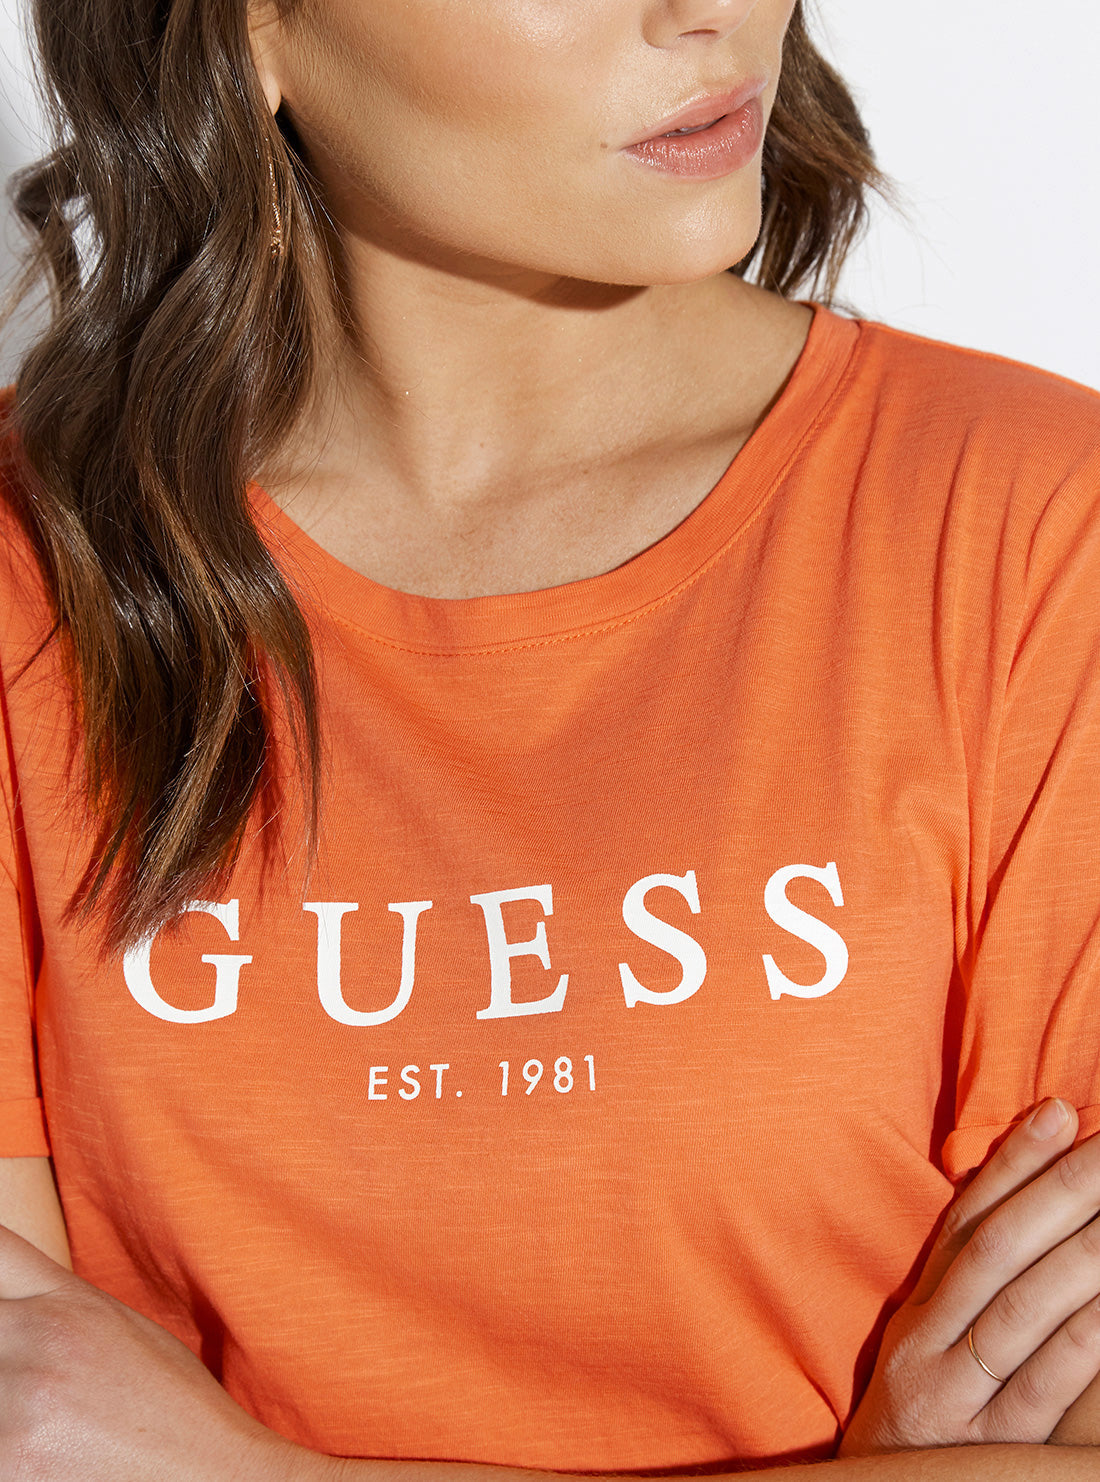 GUESS Womens Eco Orange Short Sleeve GUESS 1981 Rolled Cuff T-Shirt W0GI69R8G01 Detail View